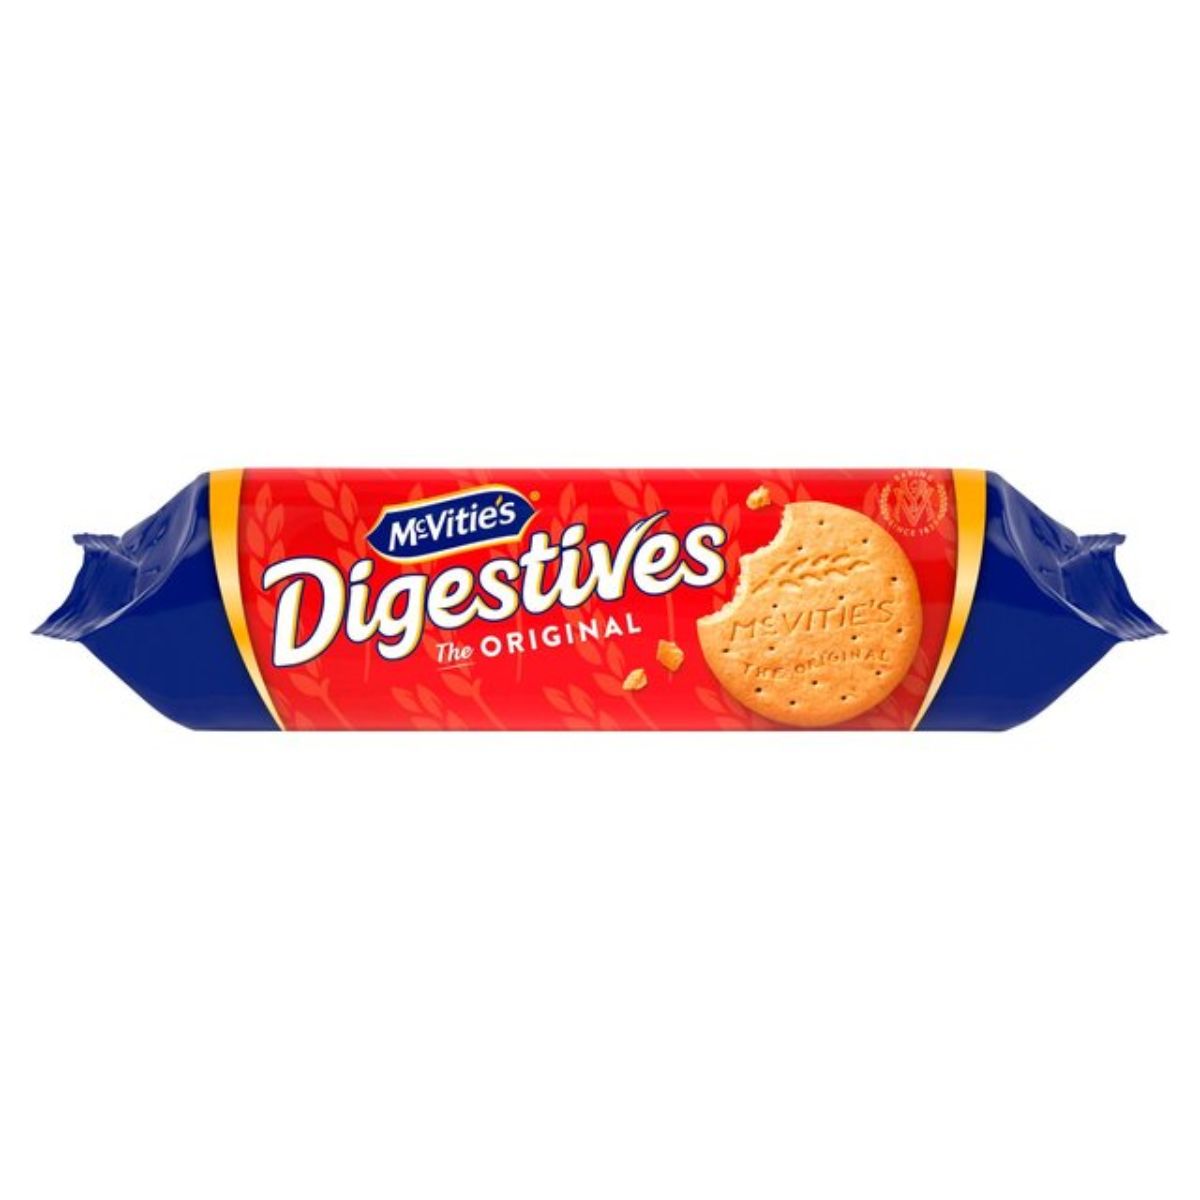 A pack of McVities - Digestives The Original - 360g biscuits on a white background.